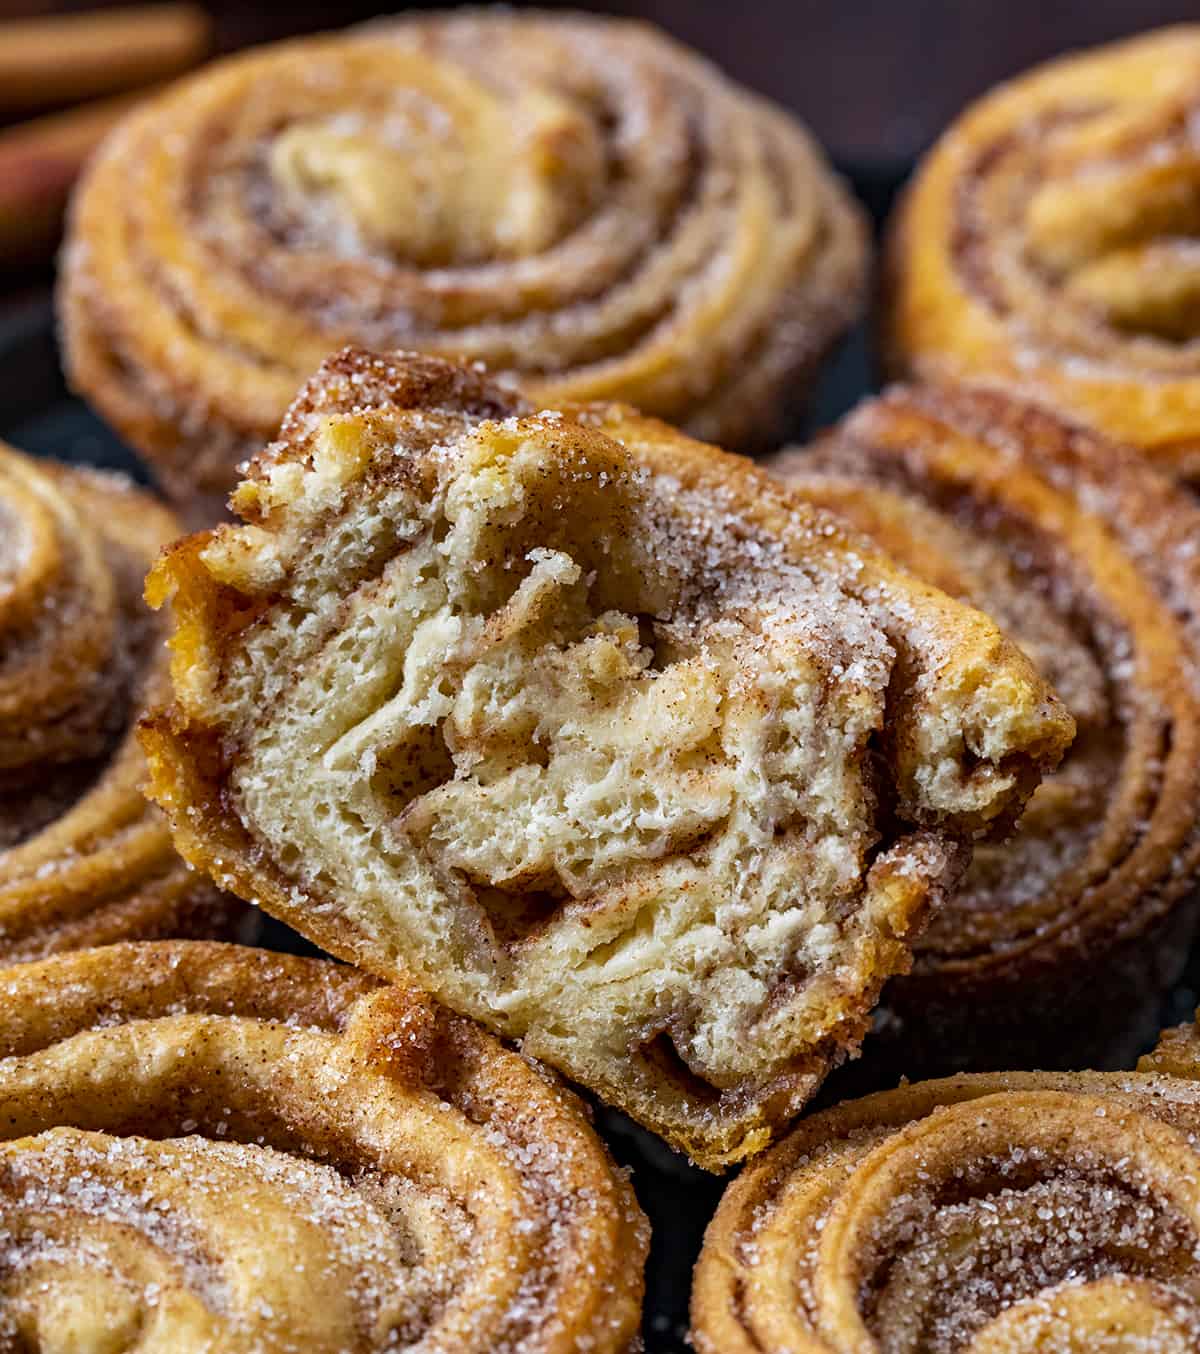 Cut into Cruffin Muffin on Top of Other Cruffins. Baking, Breakfast, Cruffins, Croissant Muffins, Easy Cruffins, Easy Cruffin Recipe, Fall Baking, Cinnamon Cruffins, Cinnamon Sugar Cruffins, Dessert, Breakfast Ideas, Brunch Recipes, i am baker, iambaker